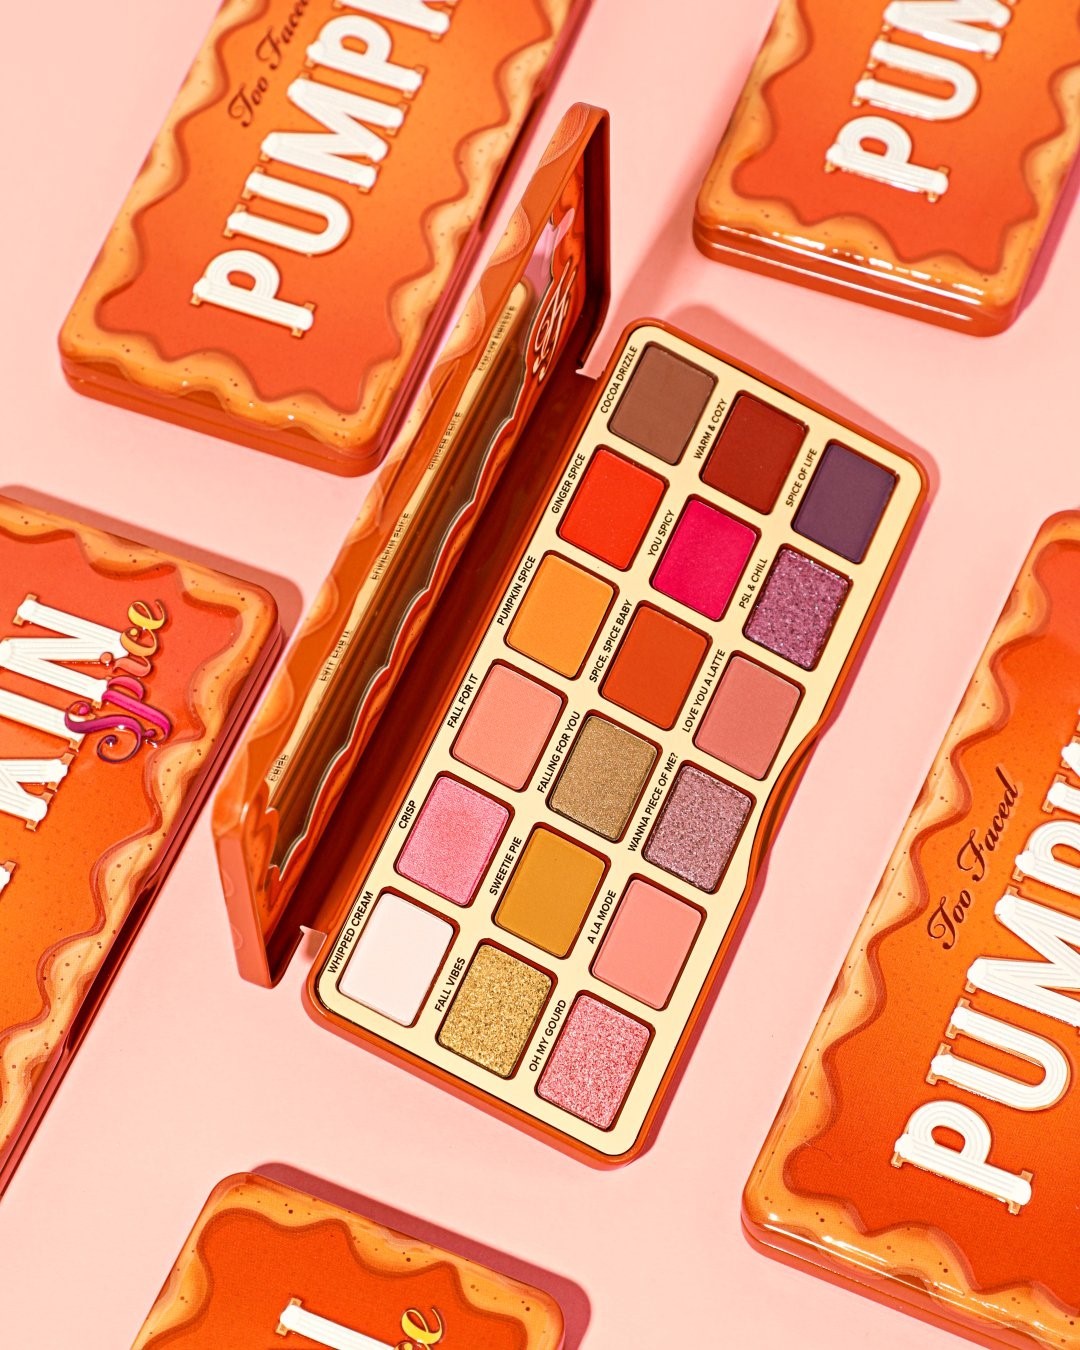 Too Faced Cosmetics - Not your average pumpkin spice. ✨ Transition your looks into Fall with the warm, spicy, & deliciously scented shades in our NEW Pumpkin Spice Eye Shadow Palette. #toofaced